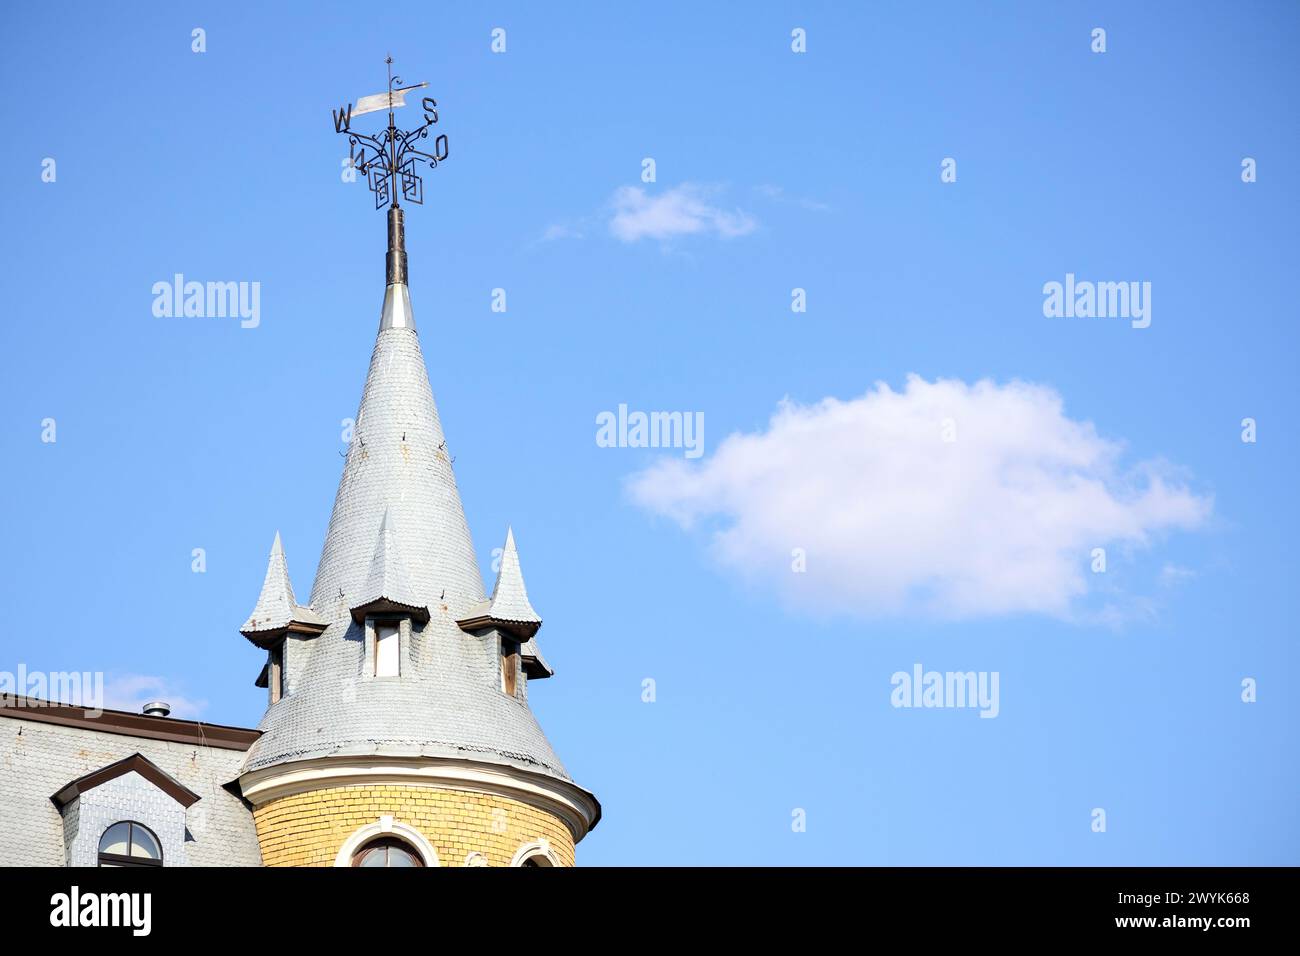 a building with several towers on a blue sky background Stock Photo